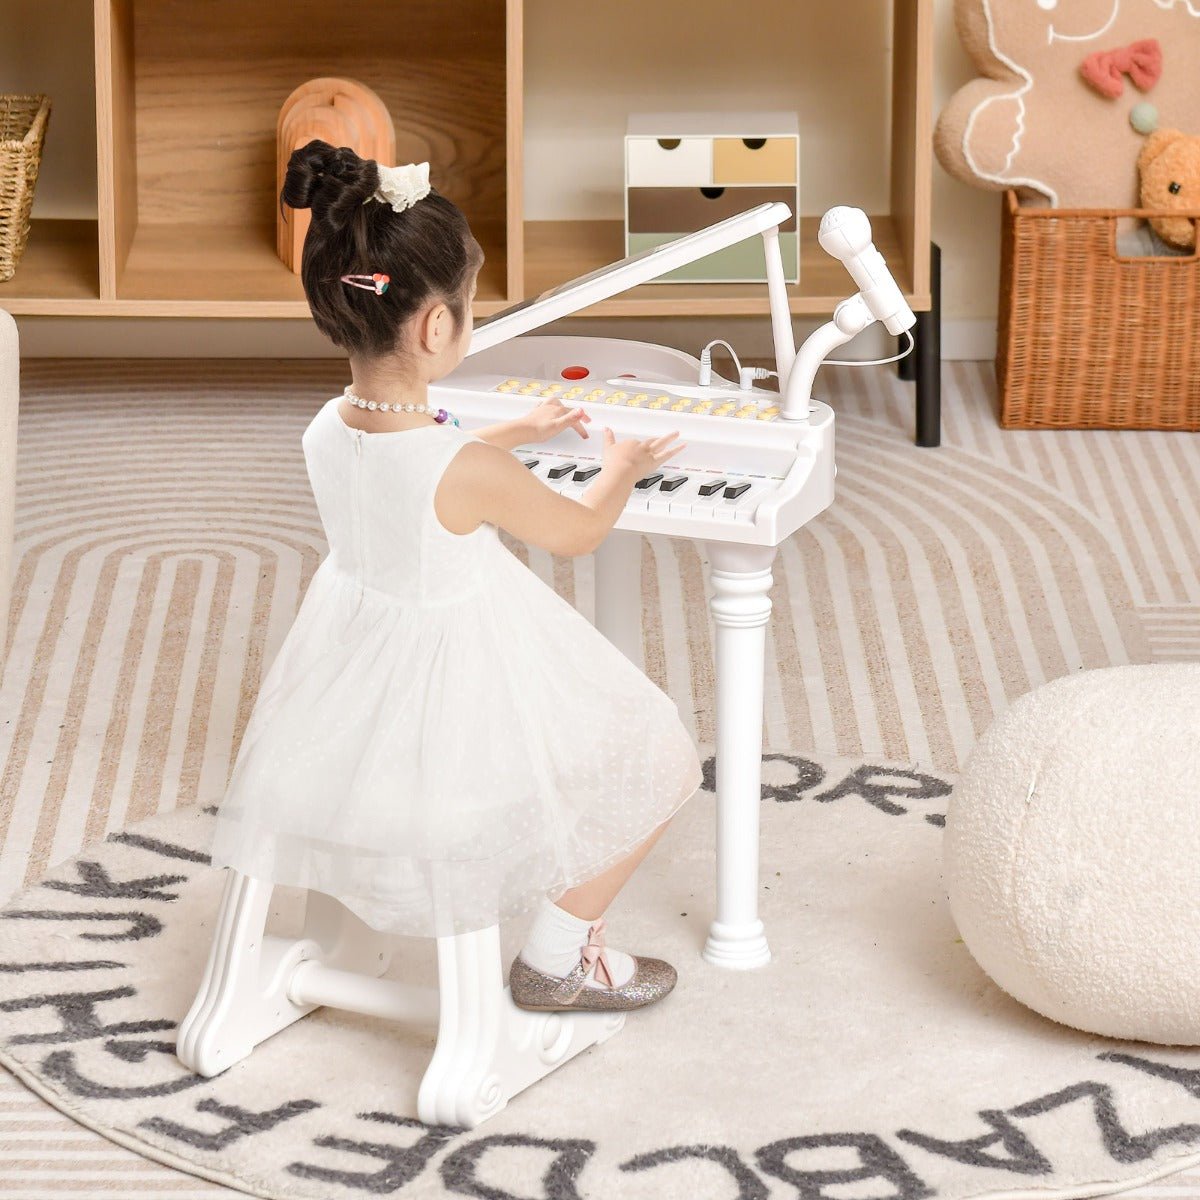 Buy the Kids Piano Keyboard with Stool and Microphone at Kids Mega Mart